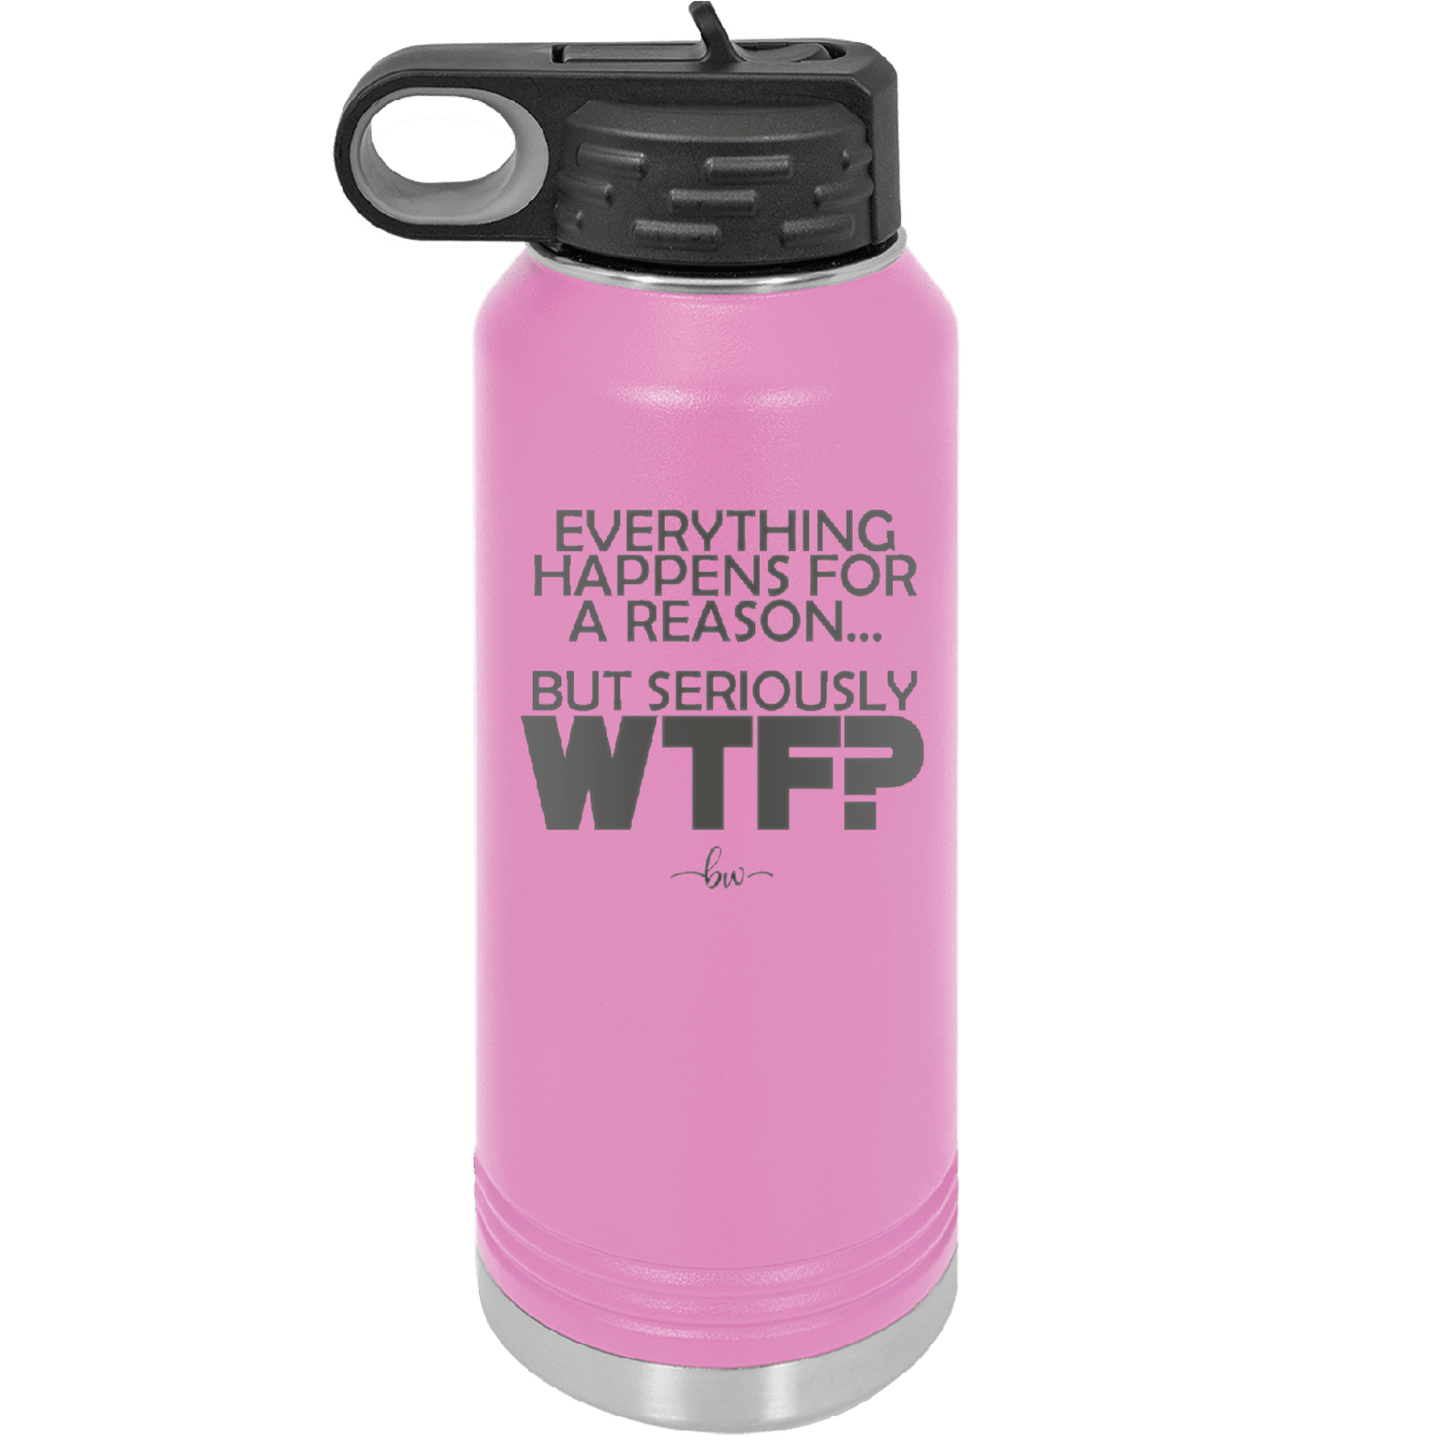 Everything Happens for a Reason but Seriously WTF - Laser Engraved Stainless Steel Drinkware - 1631 -